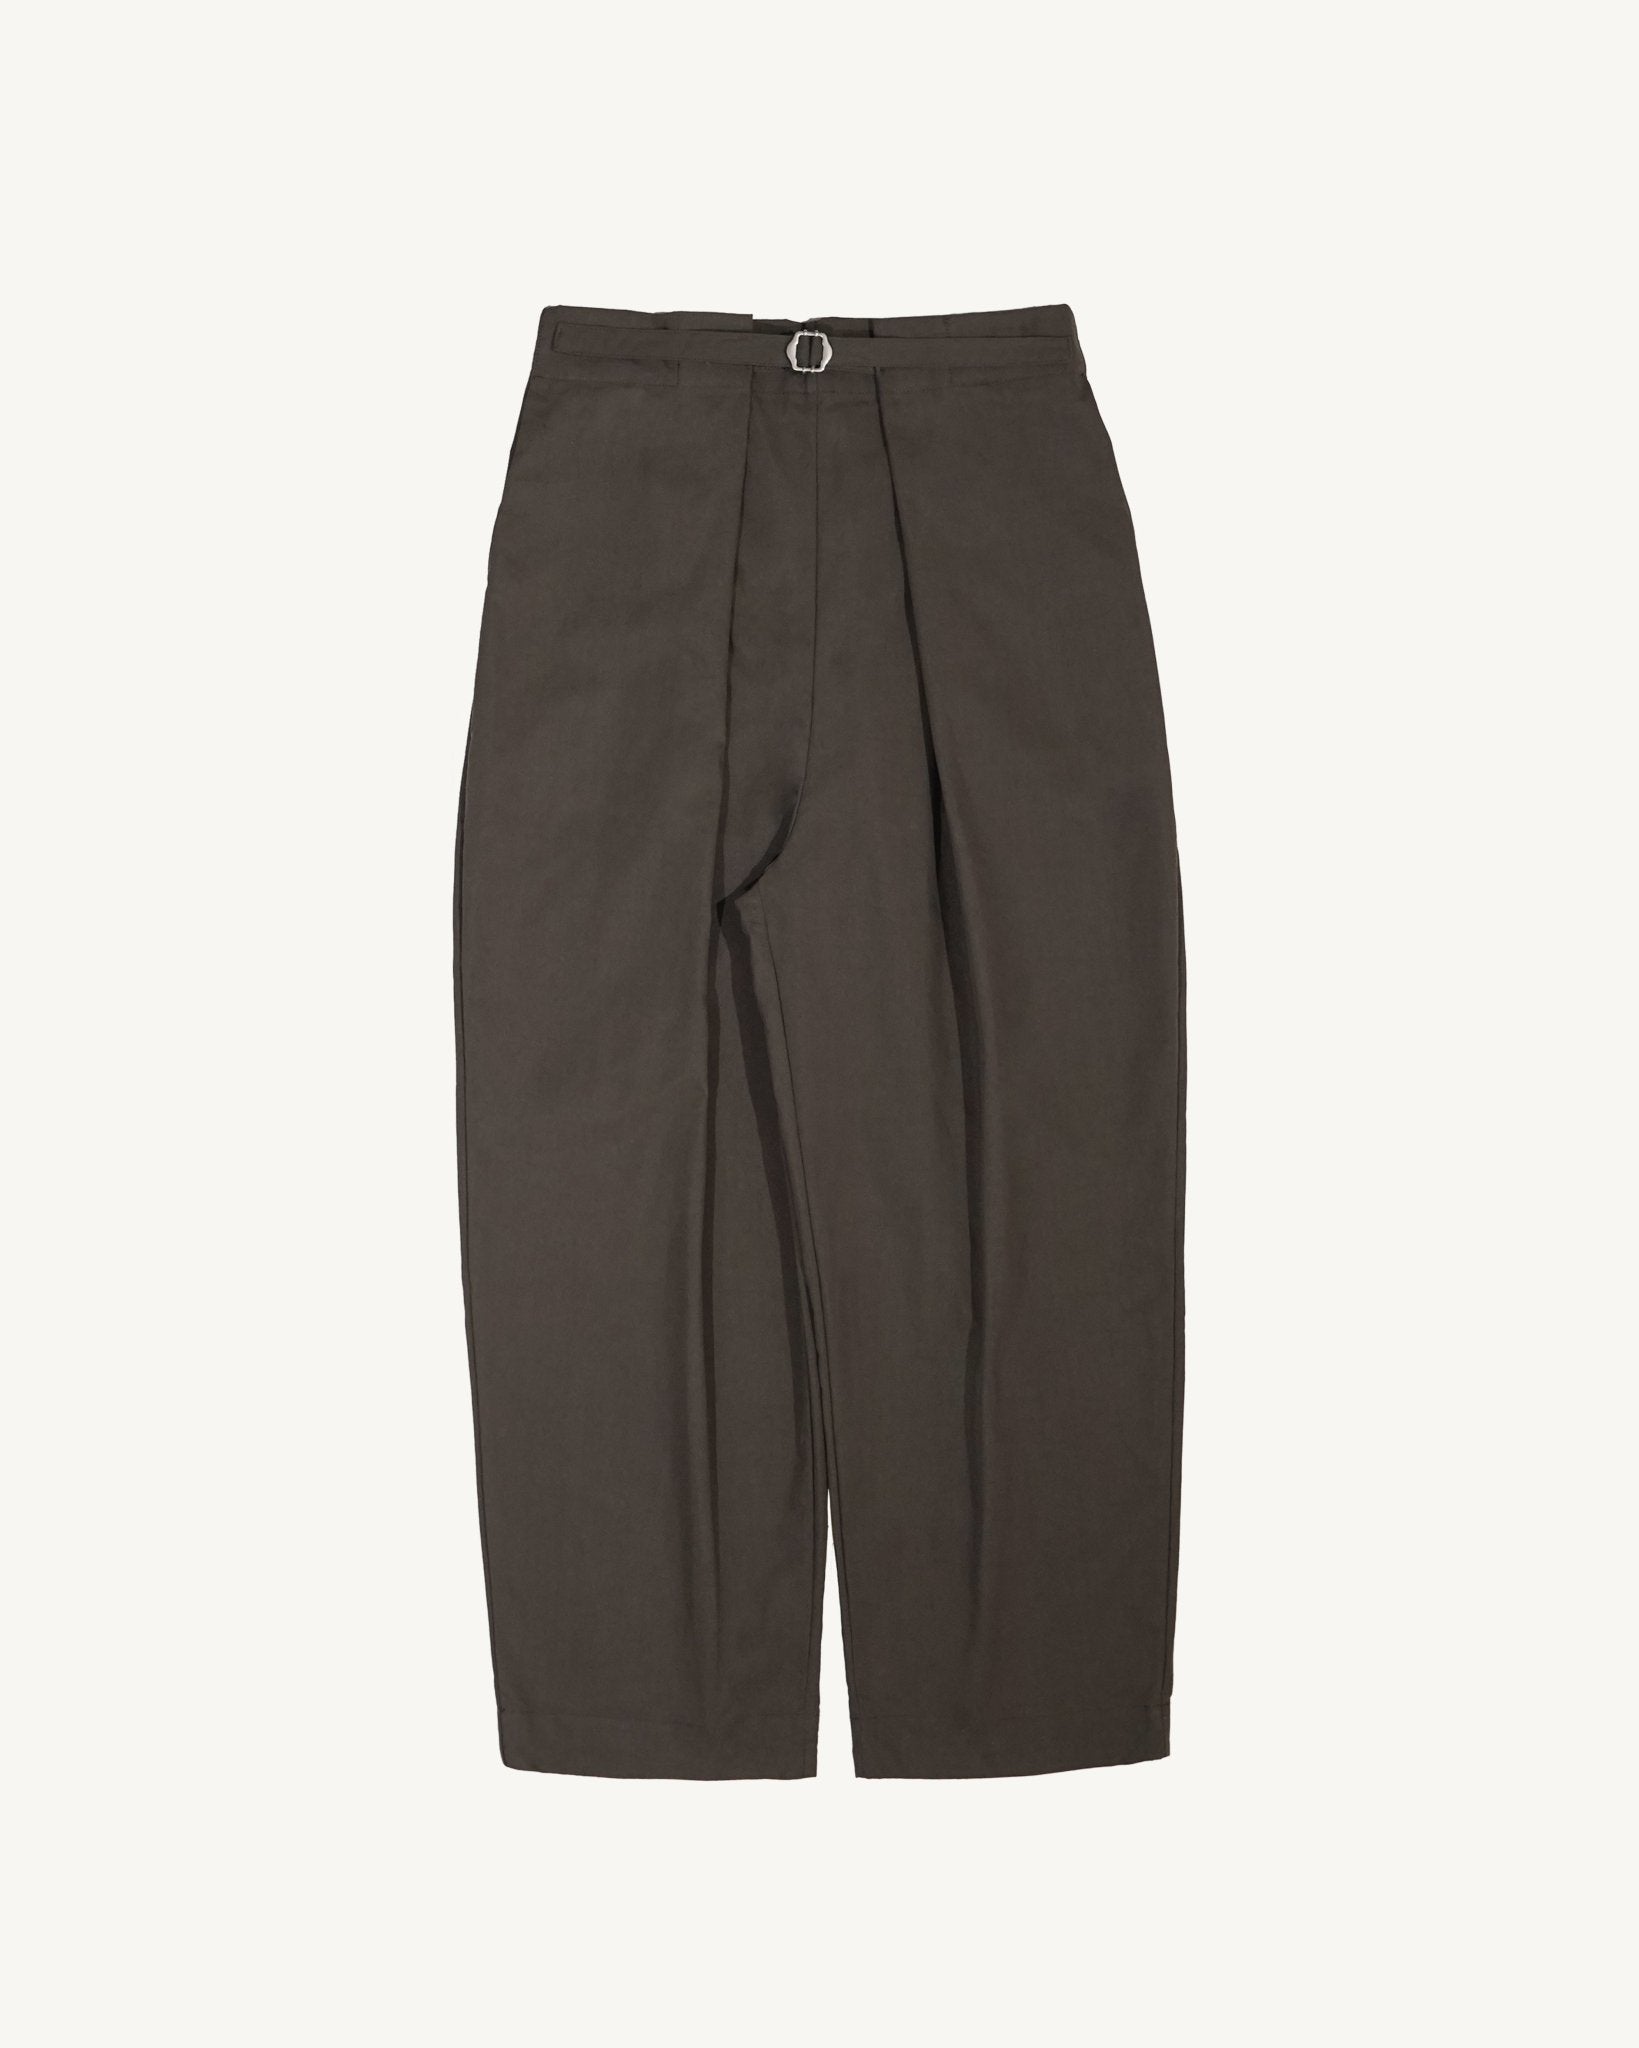 Adjustable Pleated Trousers - Cocoa - G R A Y E